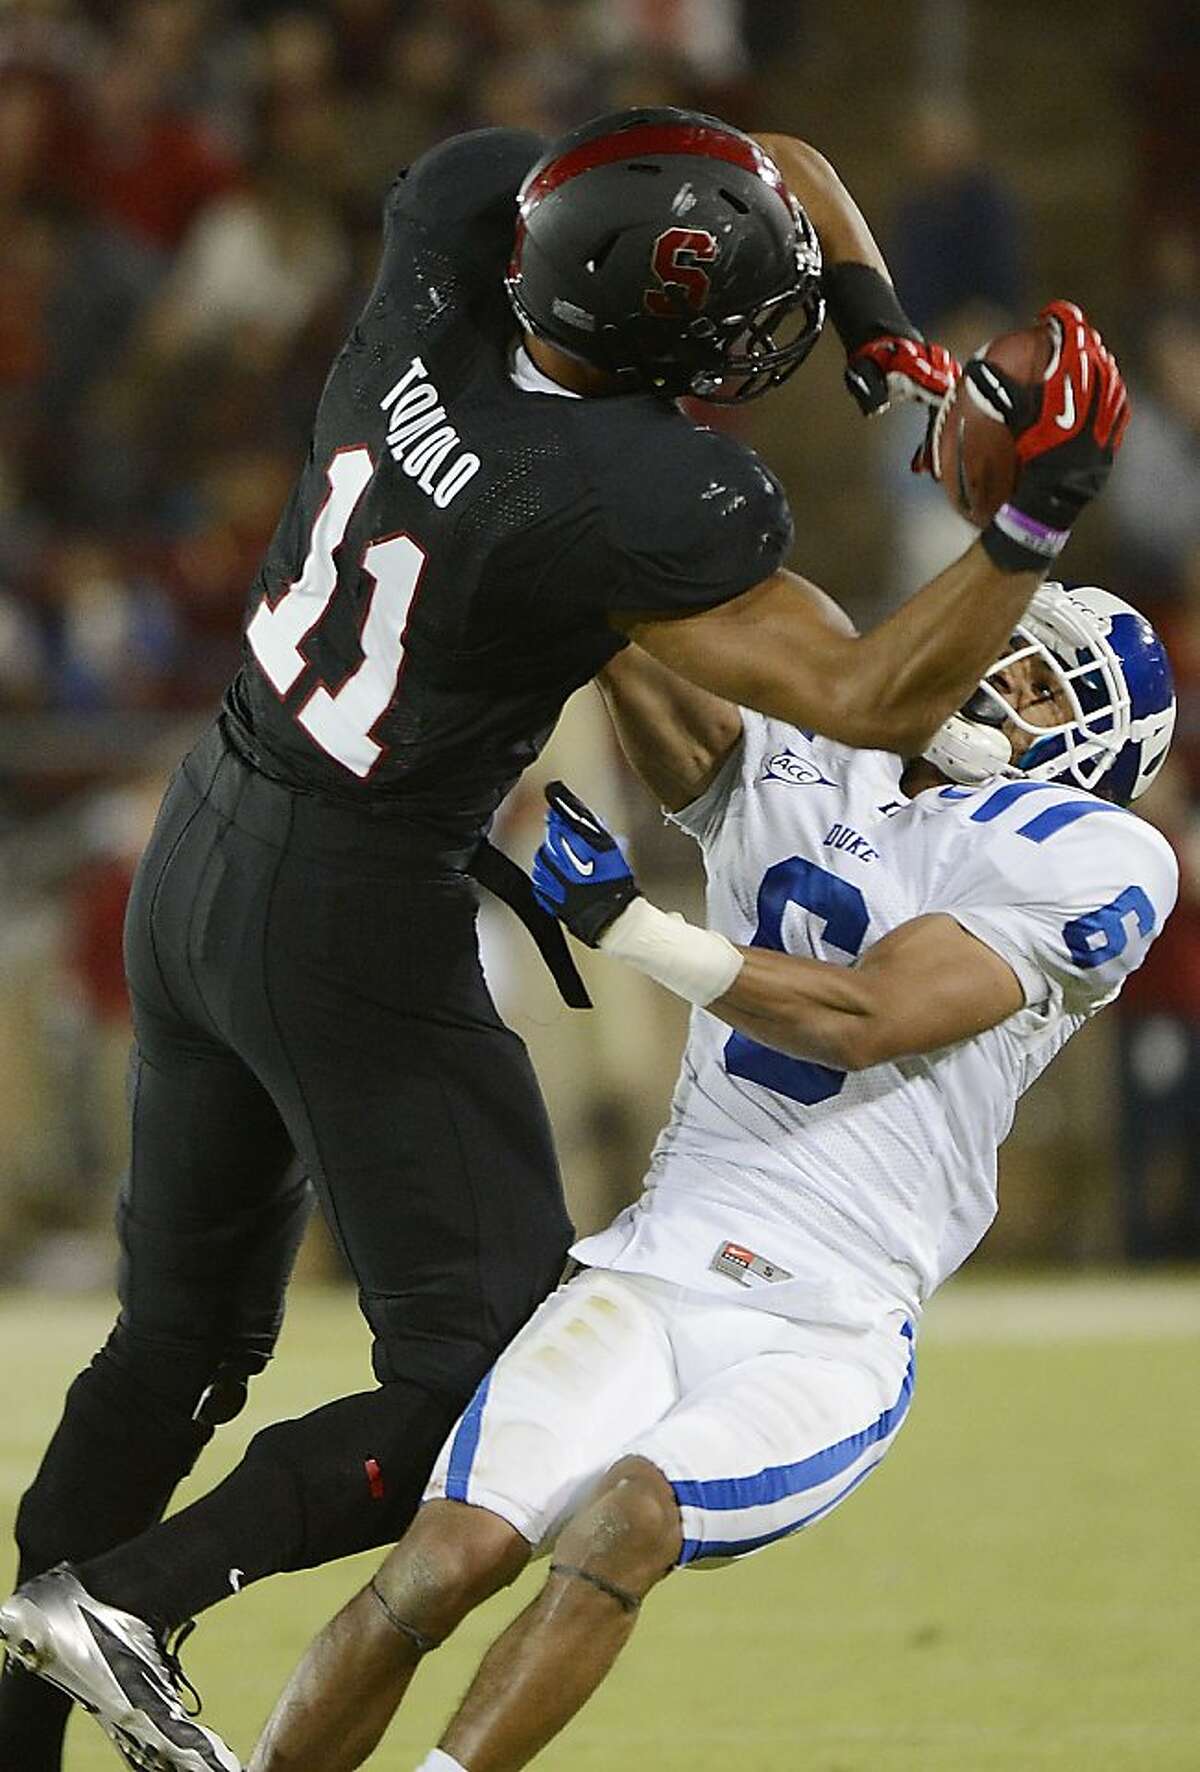 PALO ALTO, CA - SEPTEMBER 08: Levine Toilolo #11 of the Stanford Cardinals catches an eighteen yard pass over Ross Cockrell #6 of the Duke Blue Devils during the third quarter of an NCAA football game at Stanford Stadium on September 8, 2012 in Palo Alto, California. (Photo by Thearon W. Henderson/Getty Images)